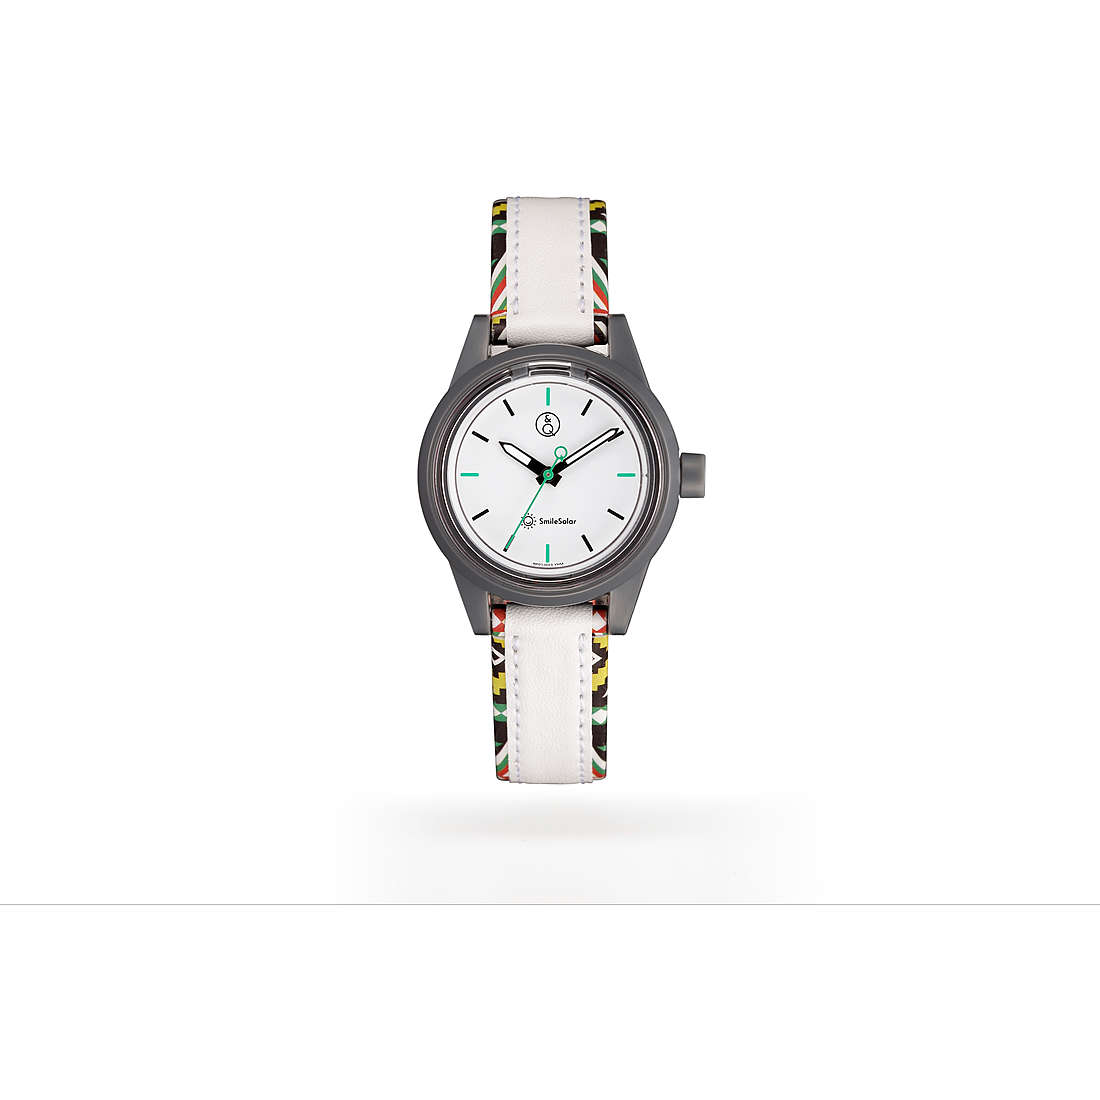 Smile Solar Native Dress Women’s Time-Only Watch